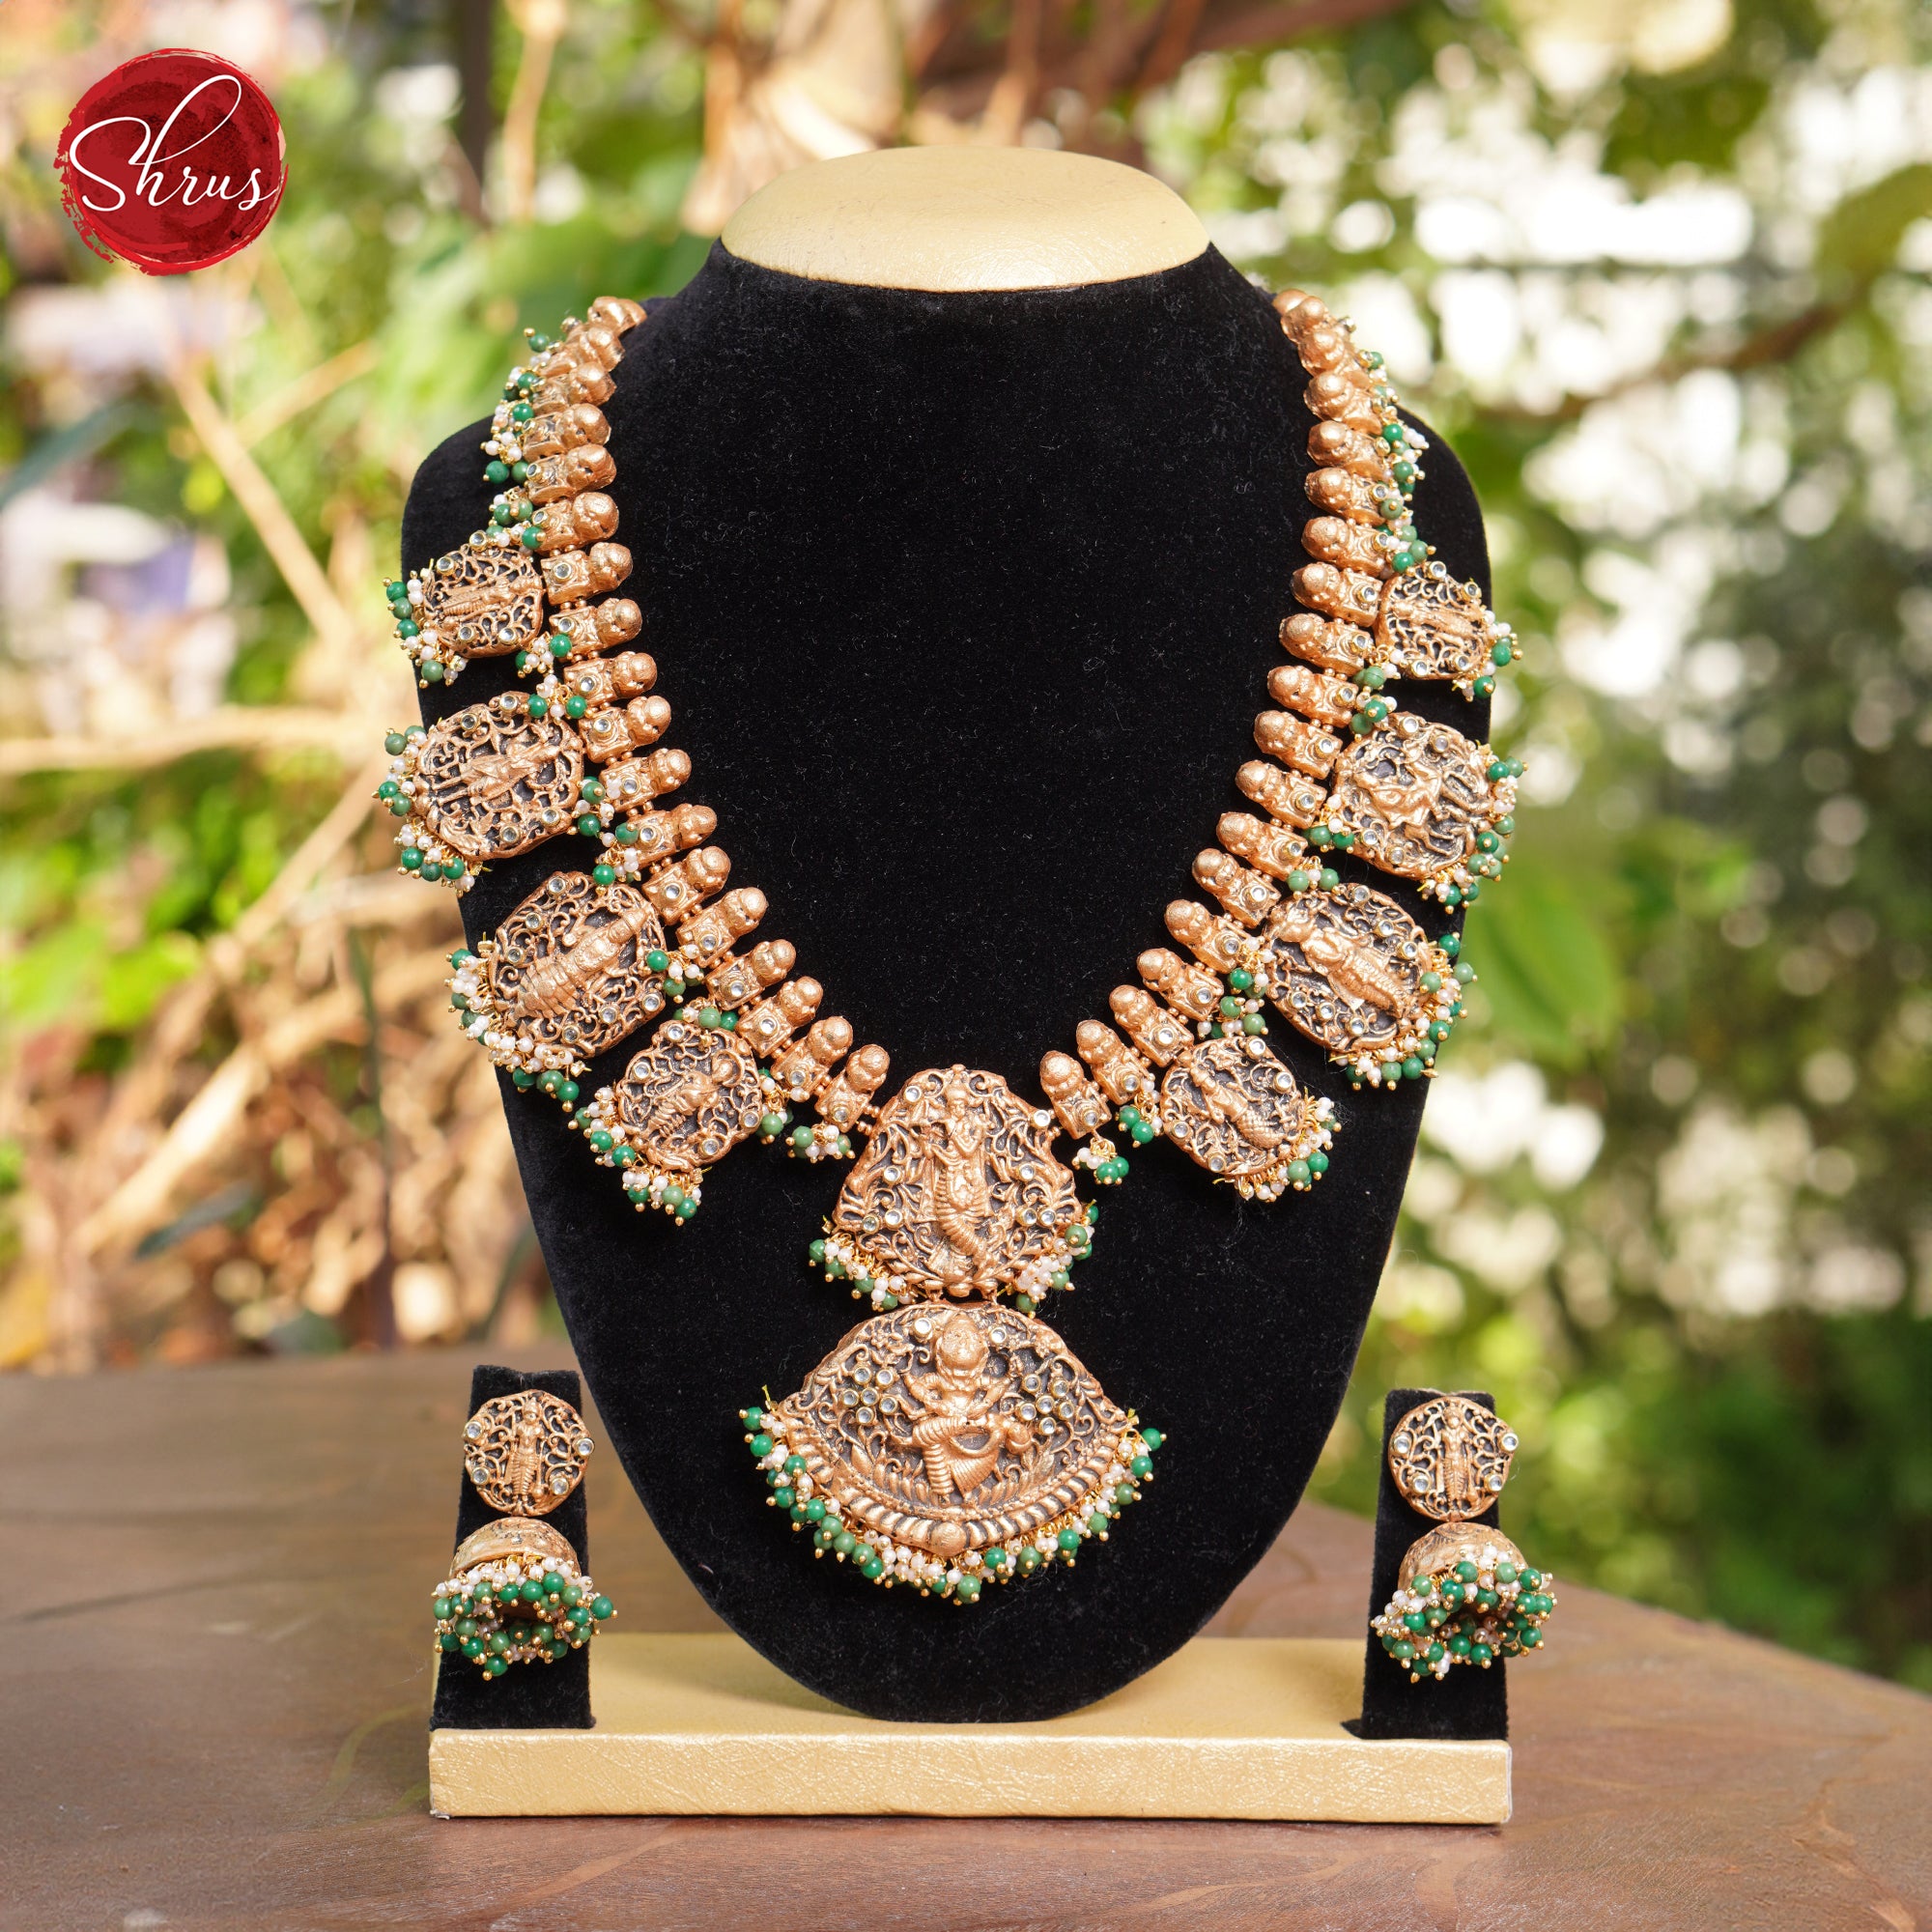 Handcrafted Dasavatharam Terracotta necklace with jhumkas - Accessories - Shop on ShrusEternity.com